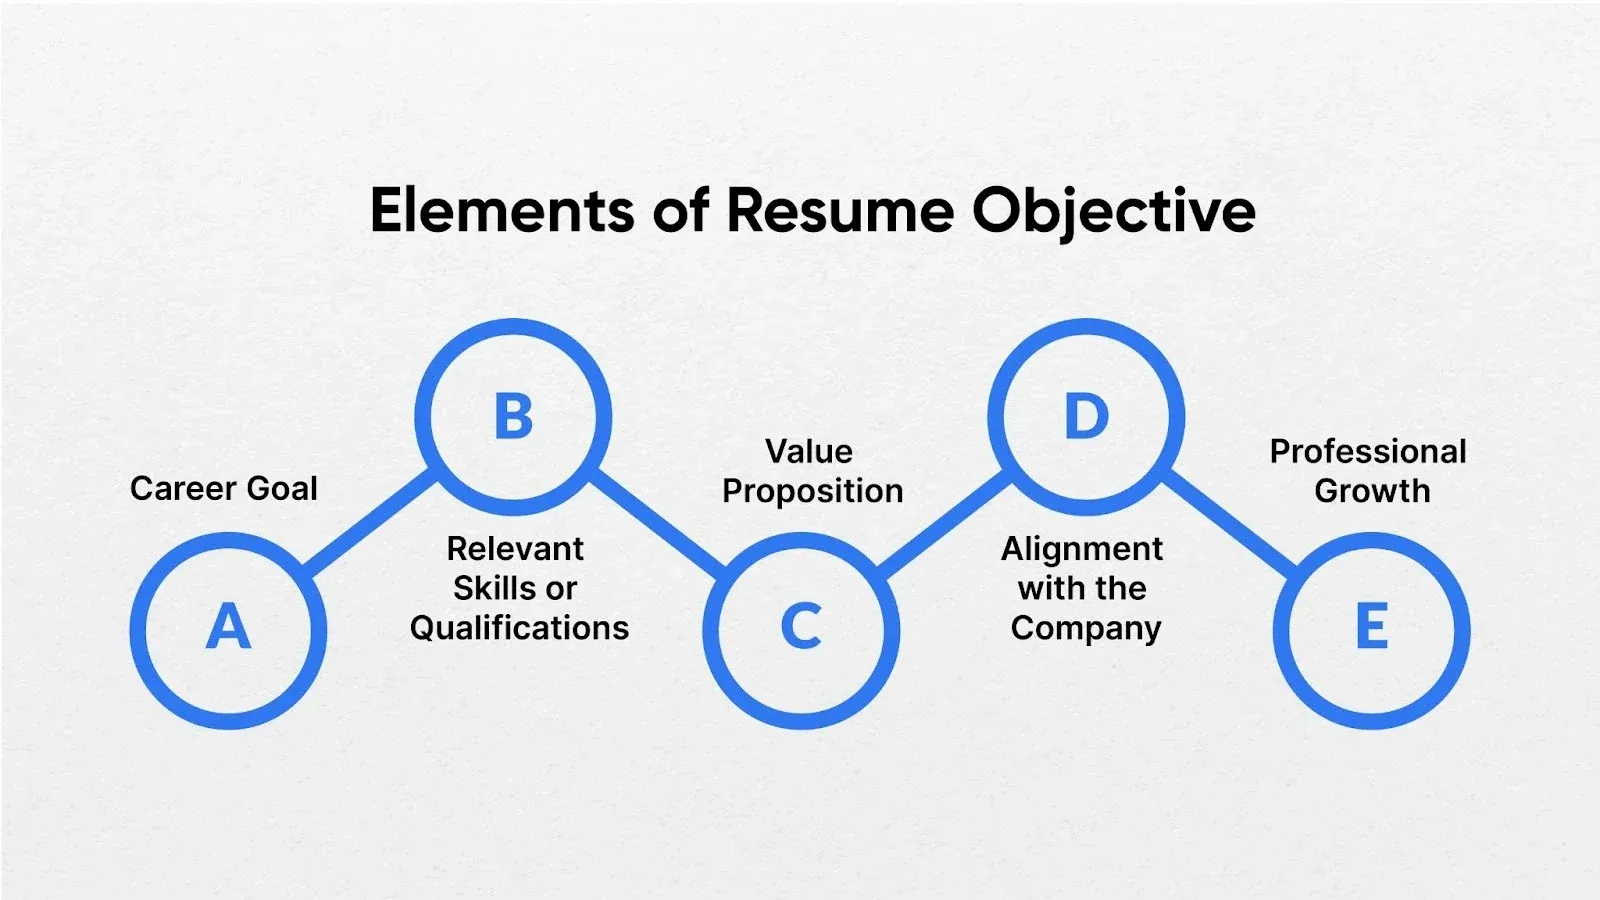 infographic representing elements of resume objective